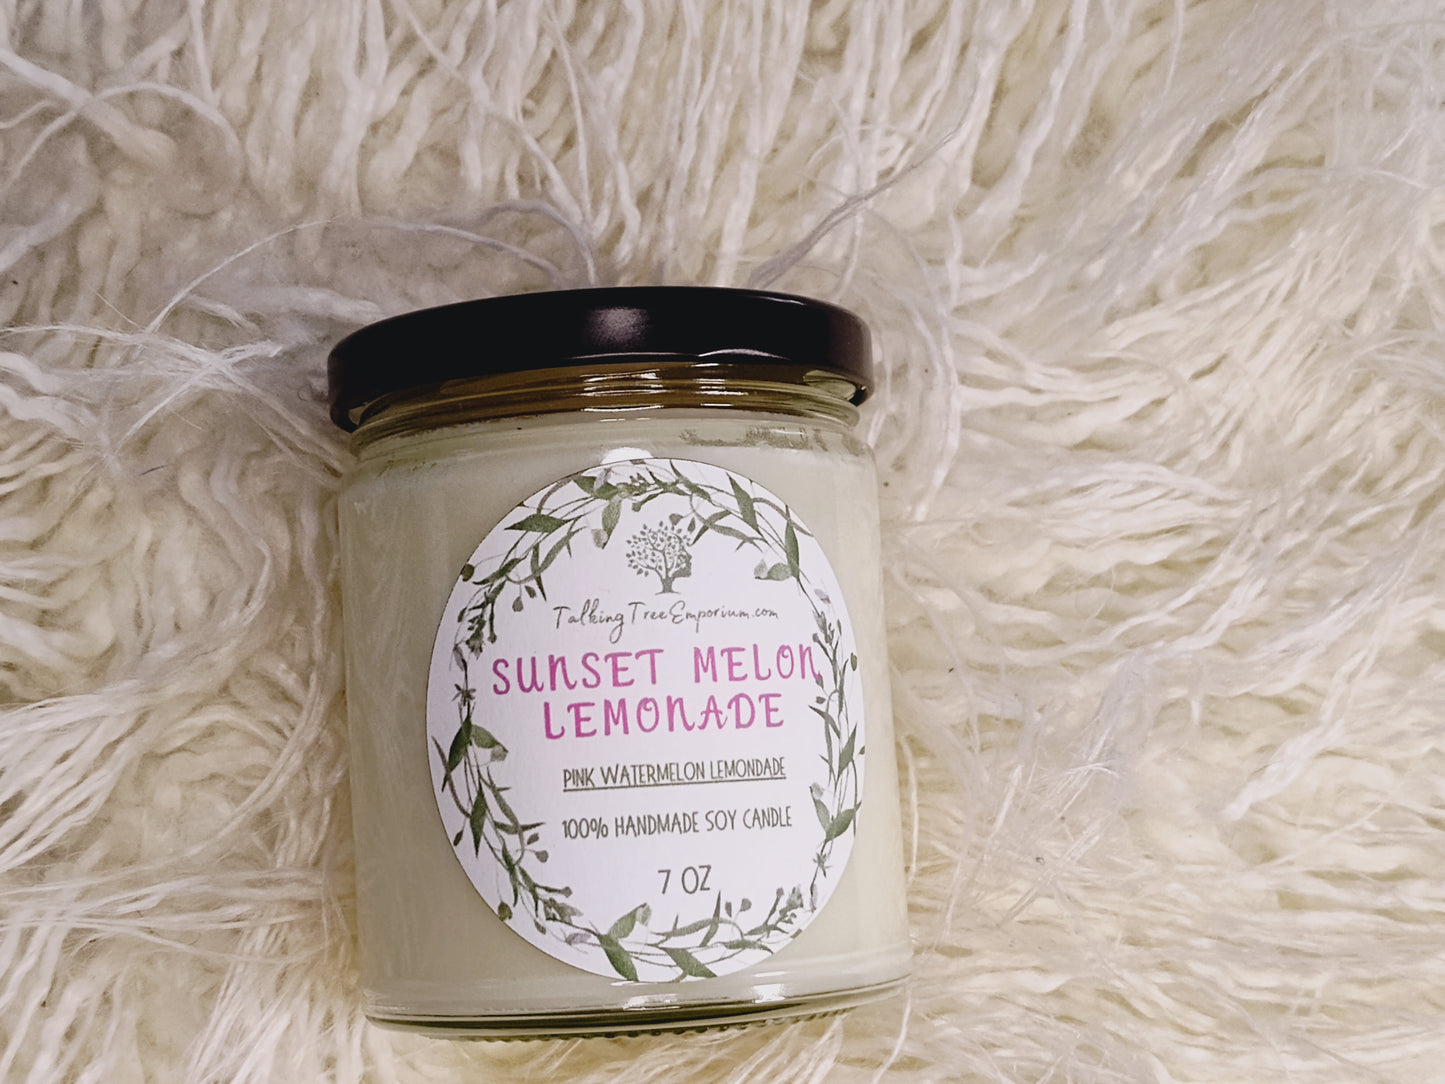 Handcrafted 7 oz 100% Soy Candles